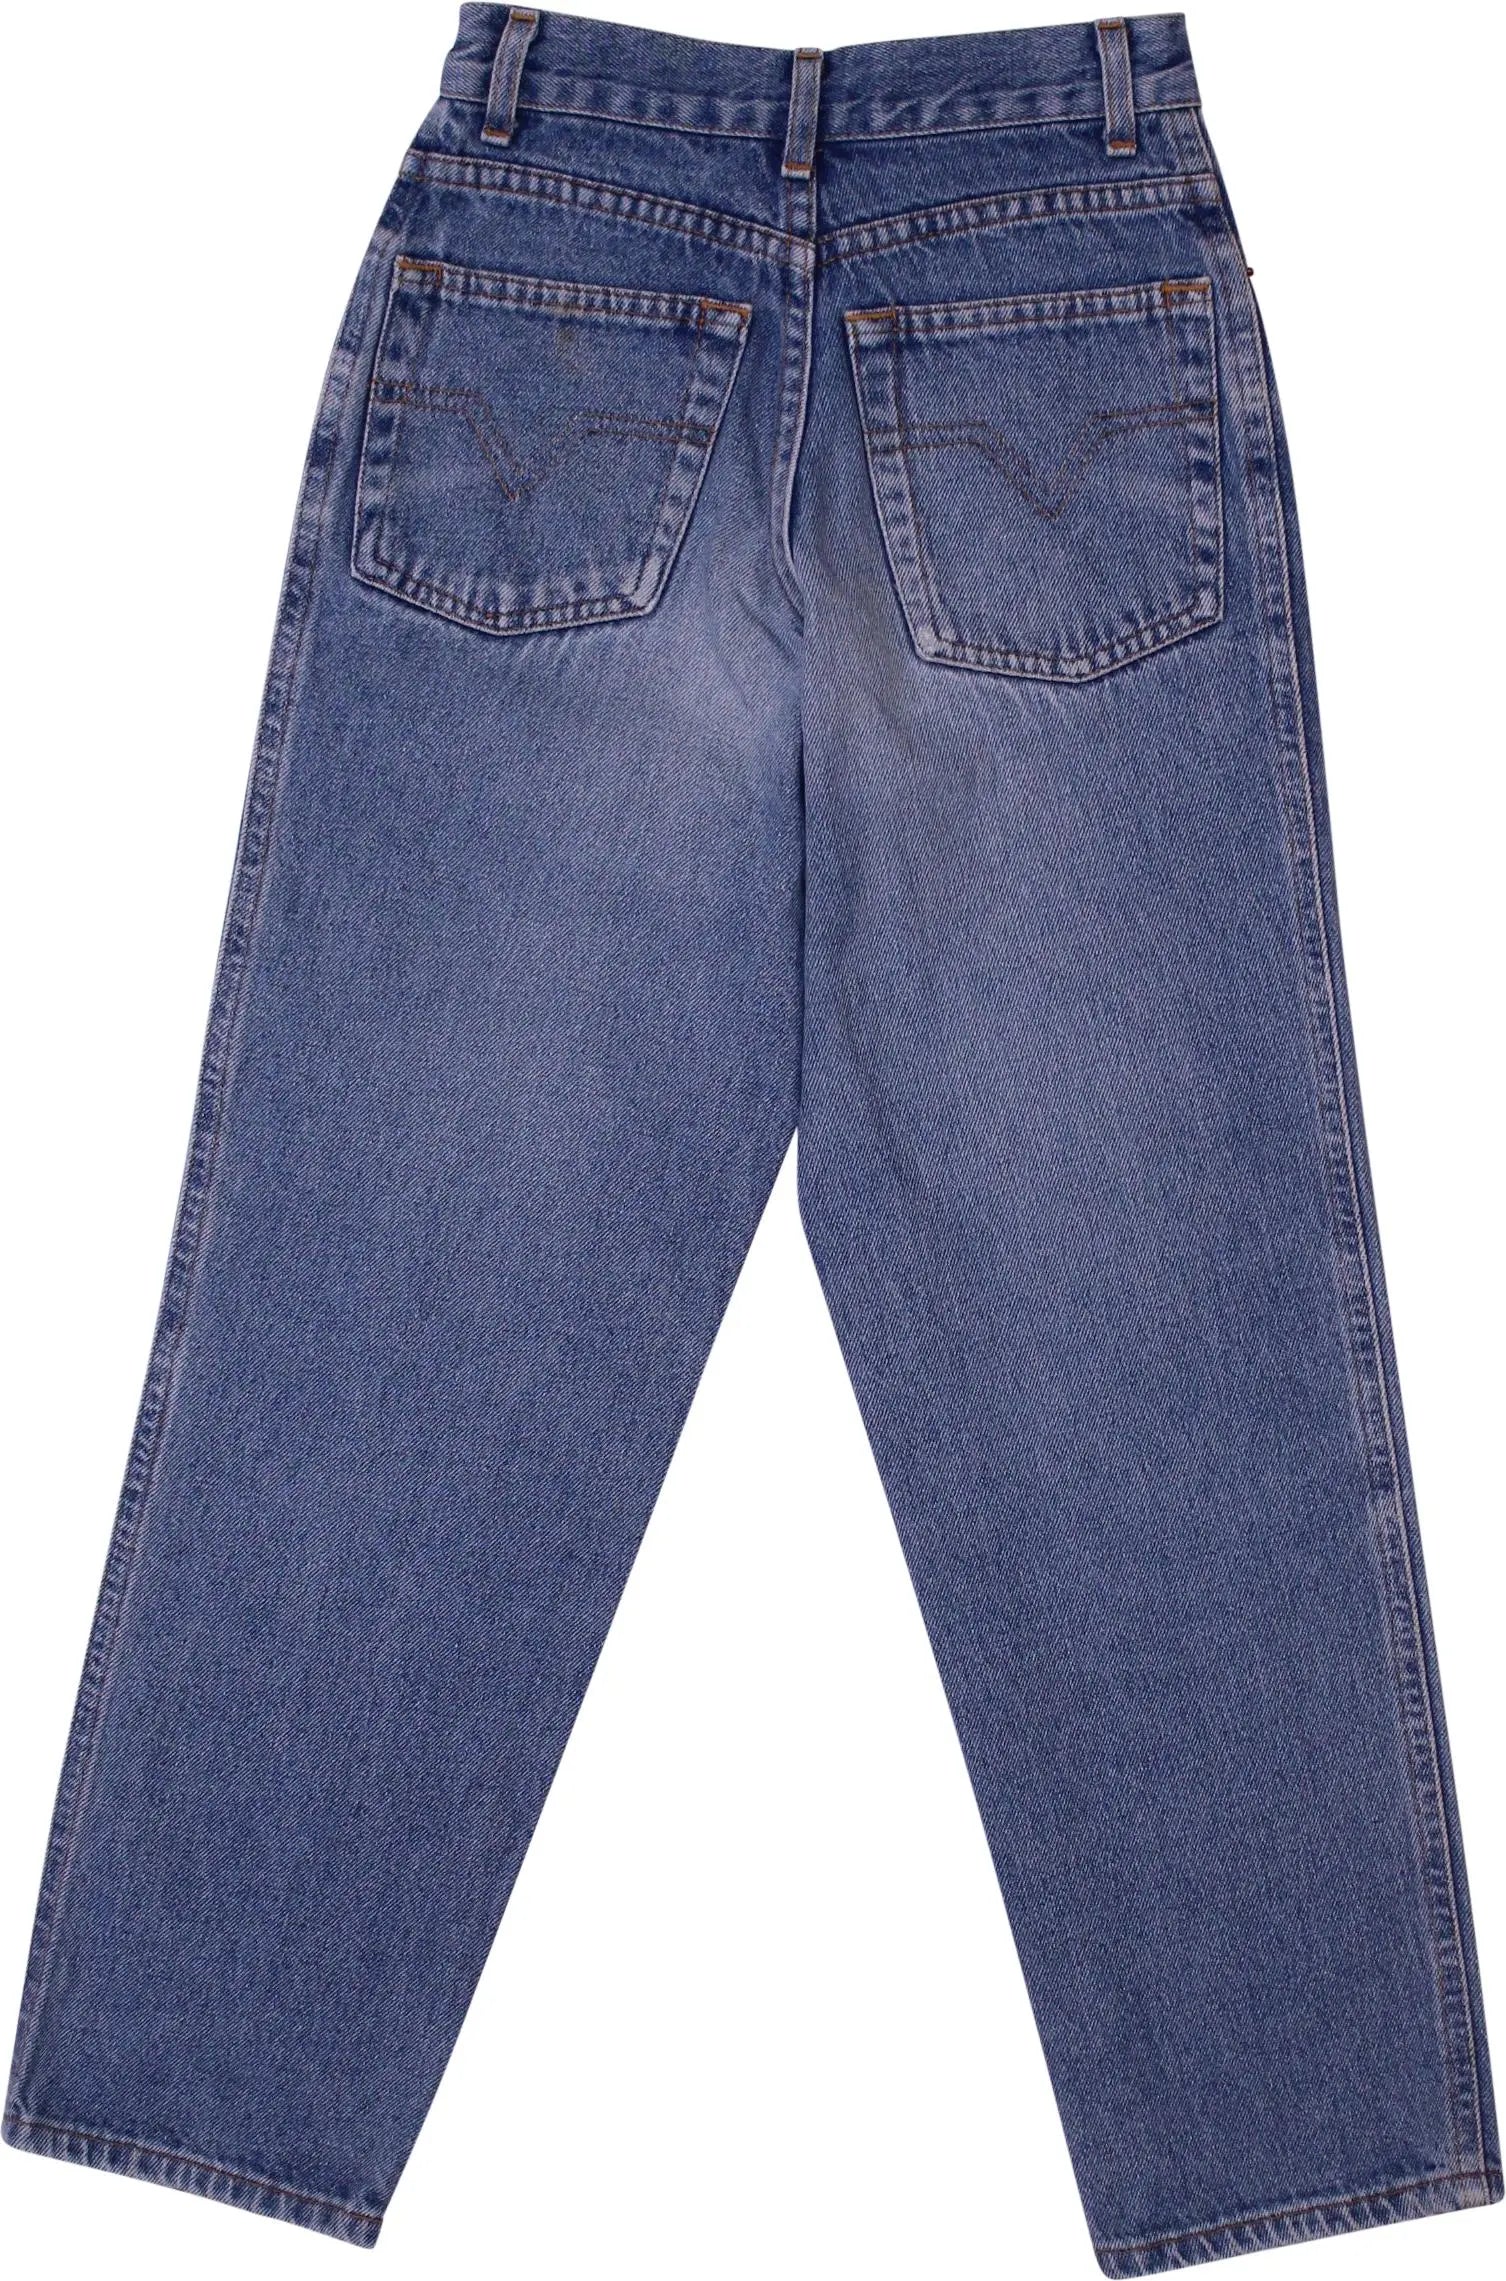 Unknown - Blue Vintage Jeans- ThriftTale.com - Vintage and second handclothing